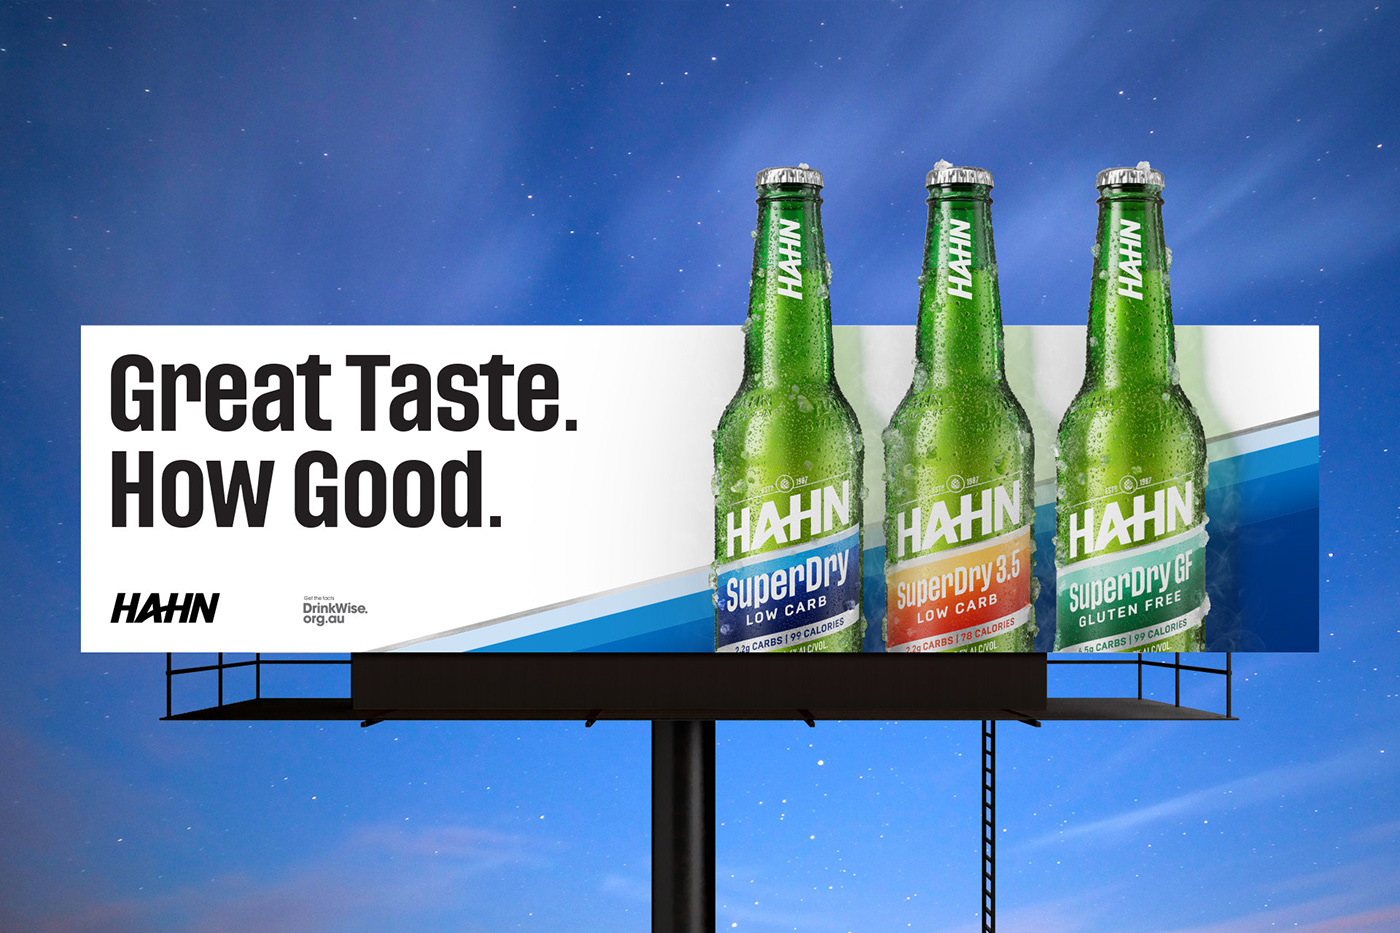 brand guidelines packaging design visual identity system beer hahn Low Carb superdry